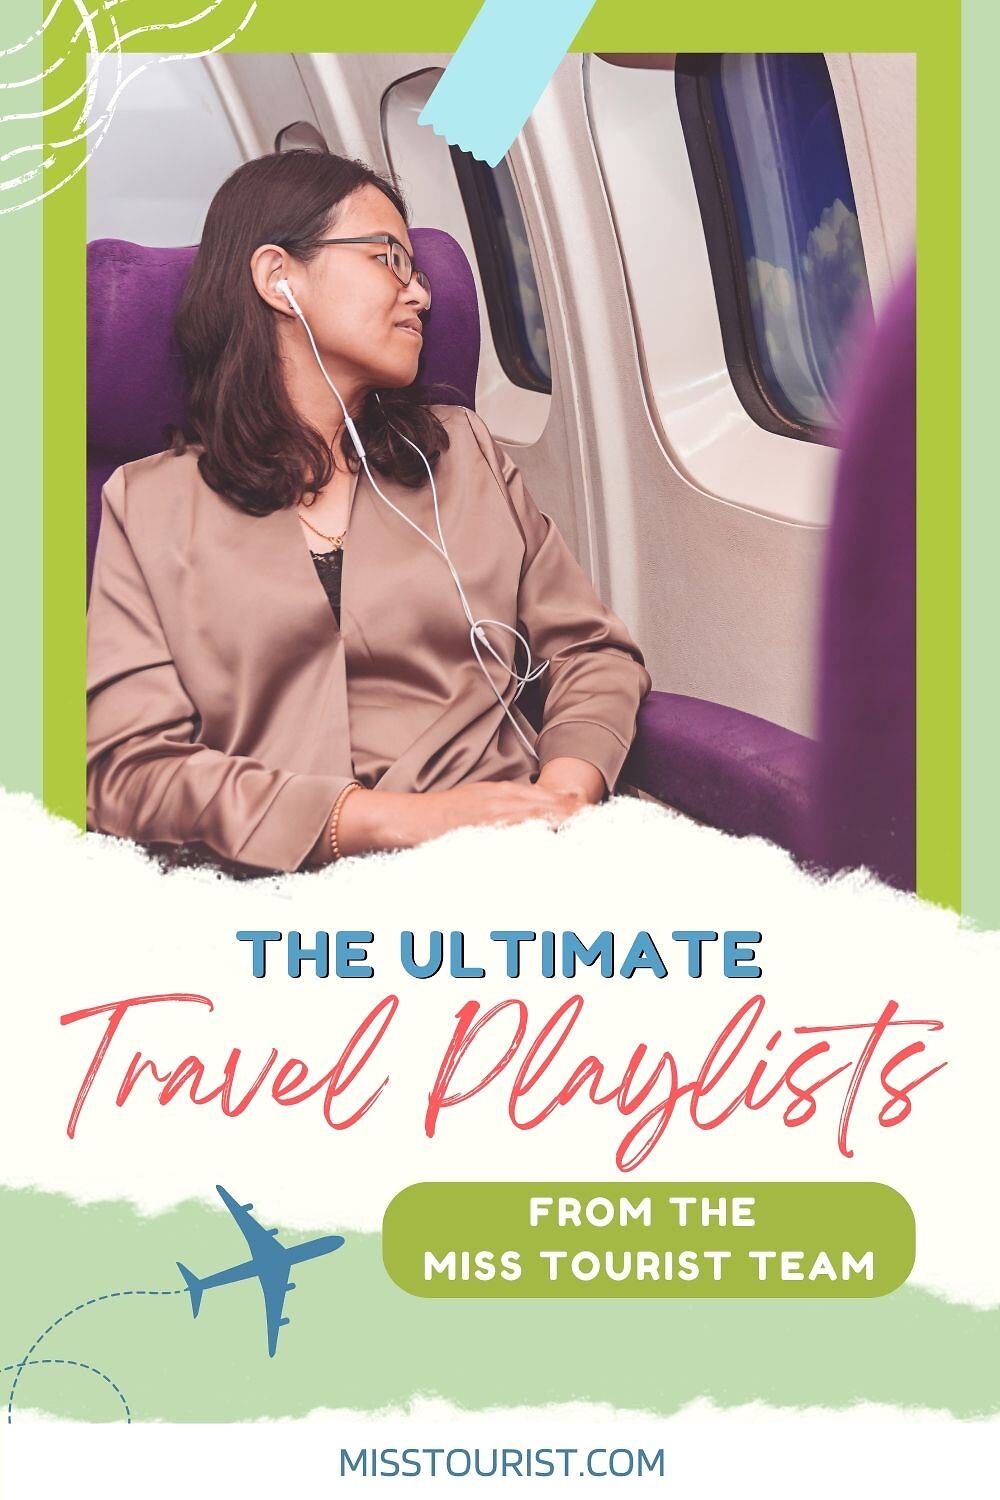 A person listens to music with earphones while sitting on an airplane. The text reads, "The Ultimate Travel Playlists from the Miss Tourist Team. misstourist.com.